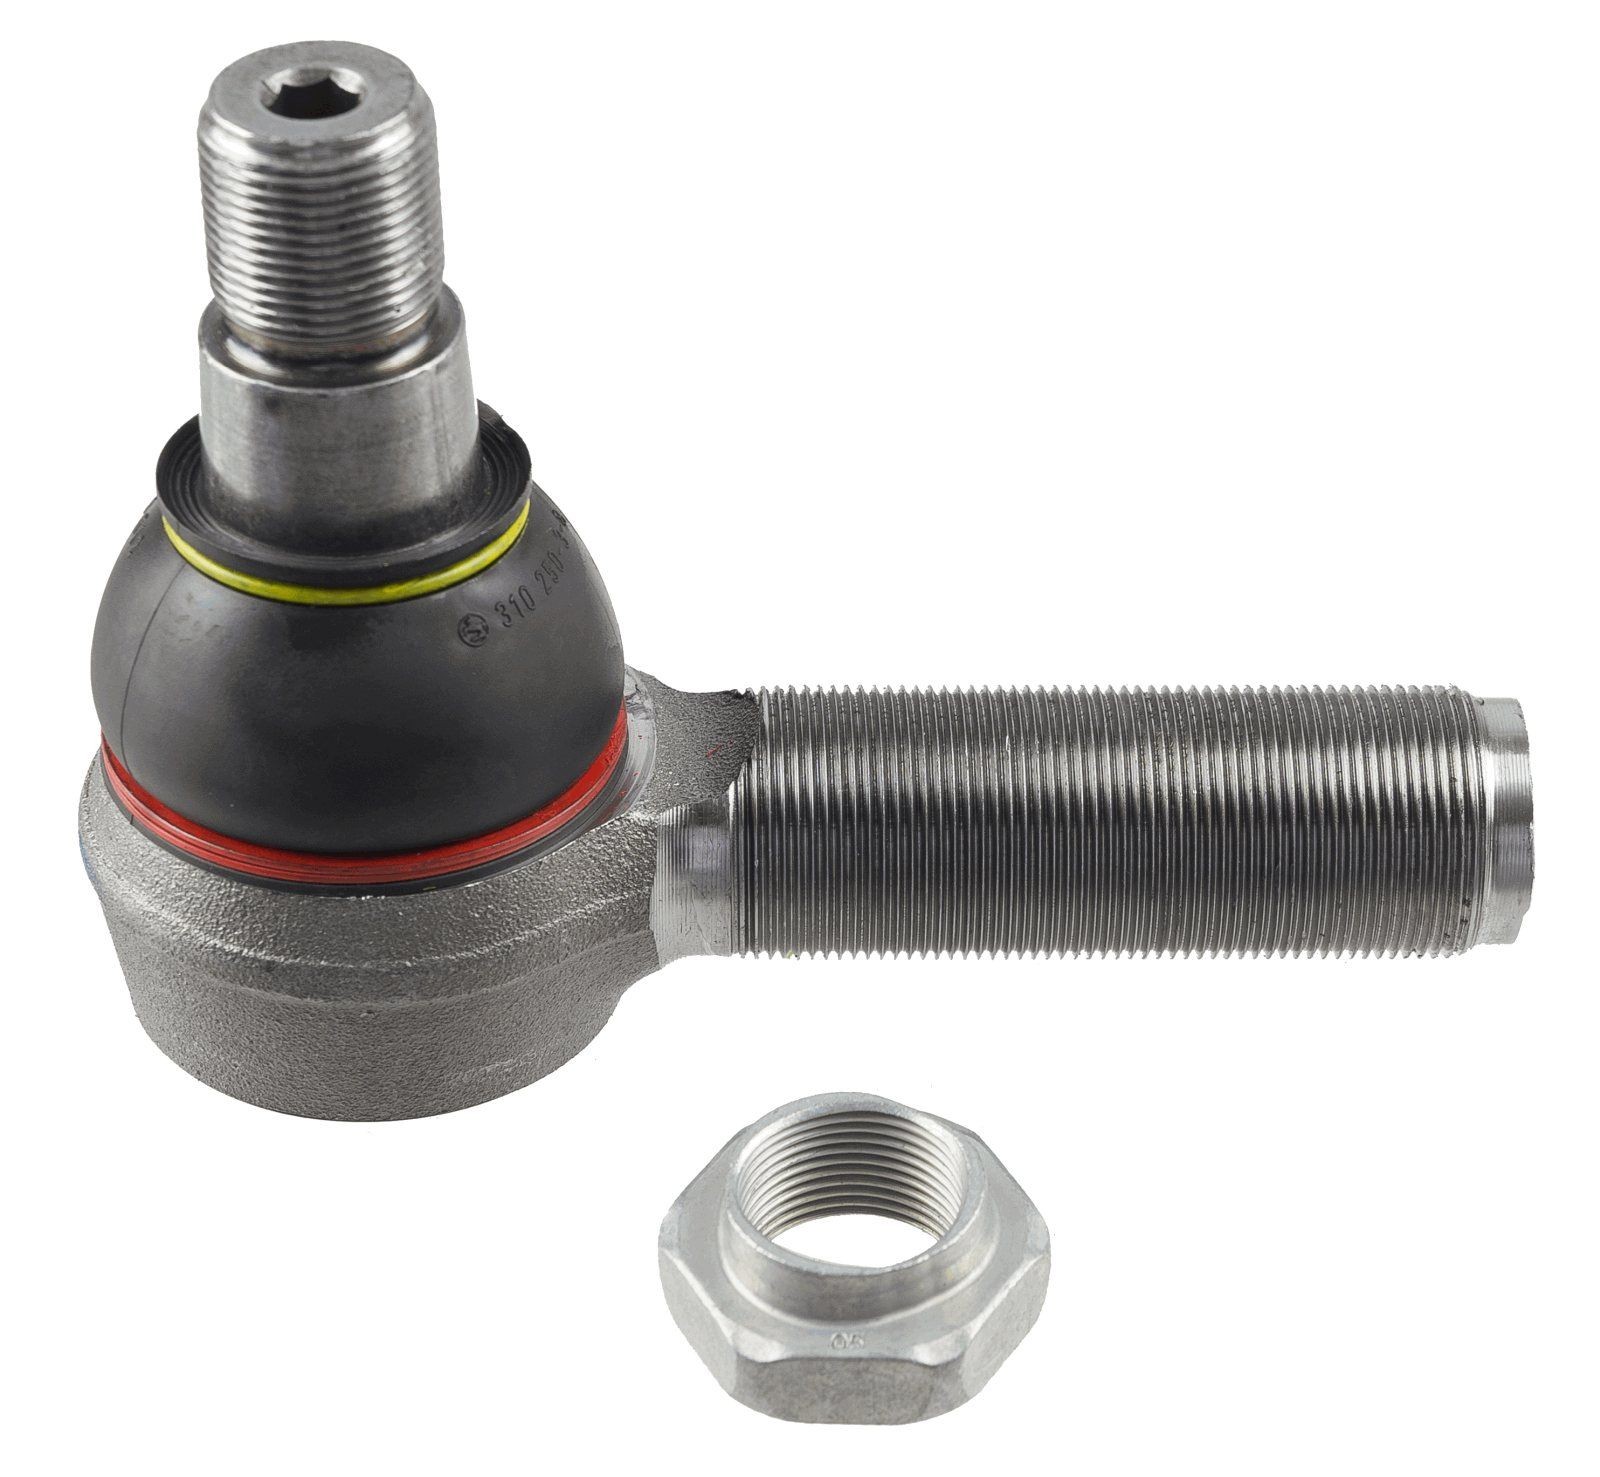 LEMFÖRDER 11505 03 Track rod end Cone Size 30 mm, M30x1,5 mm, with accessories